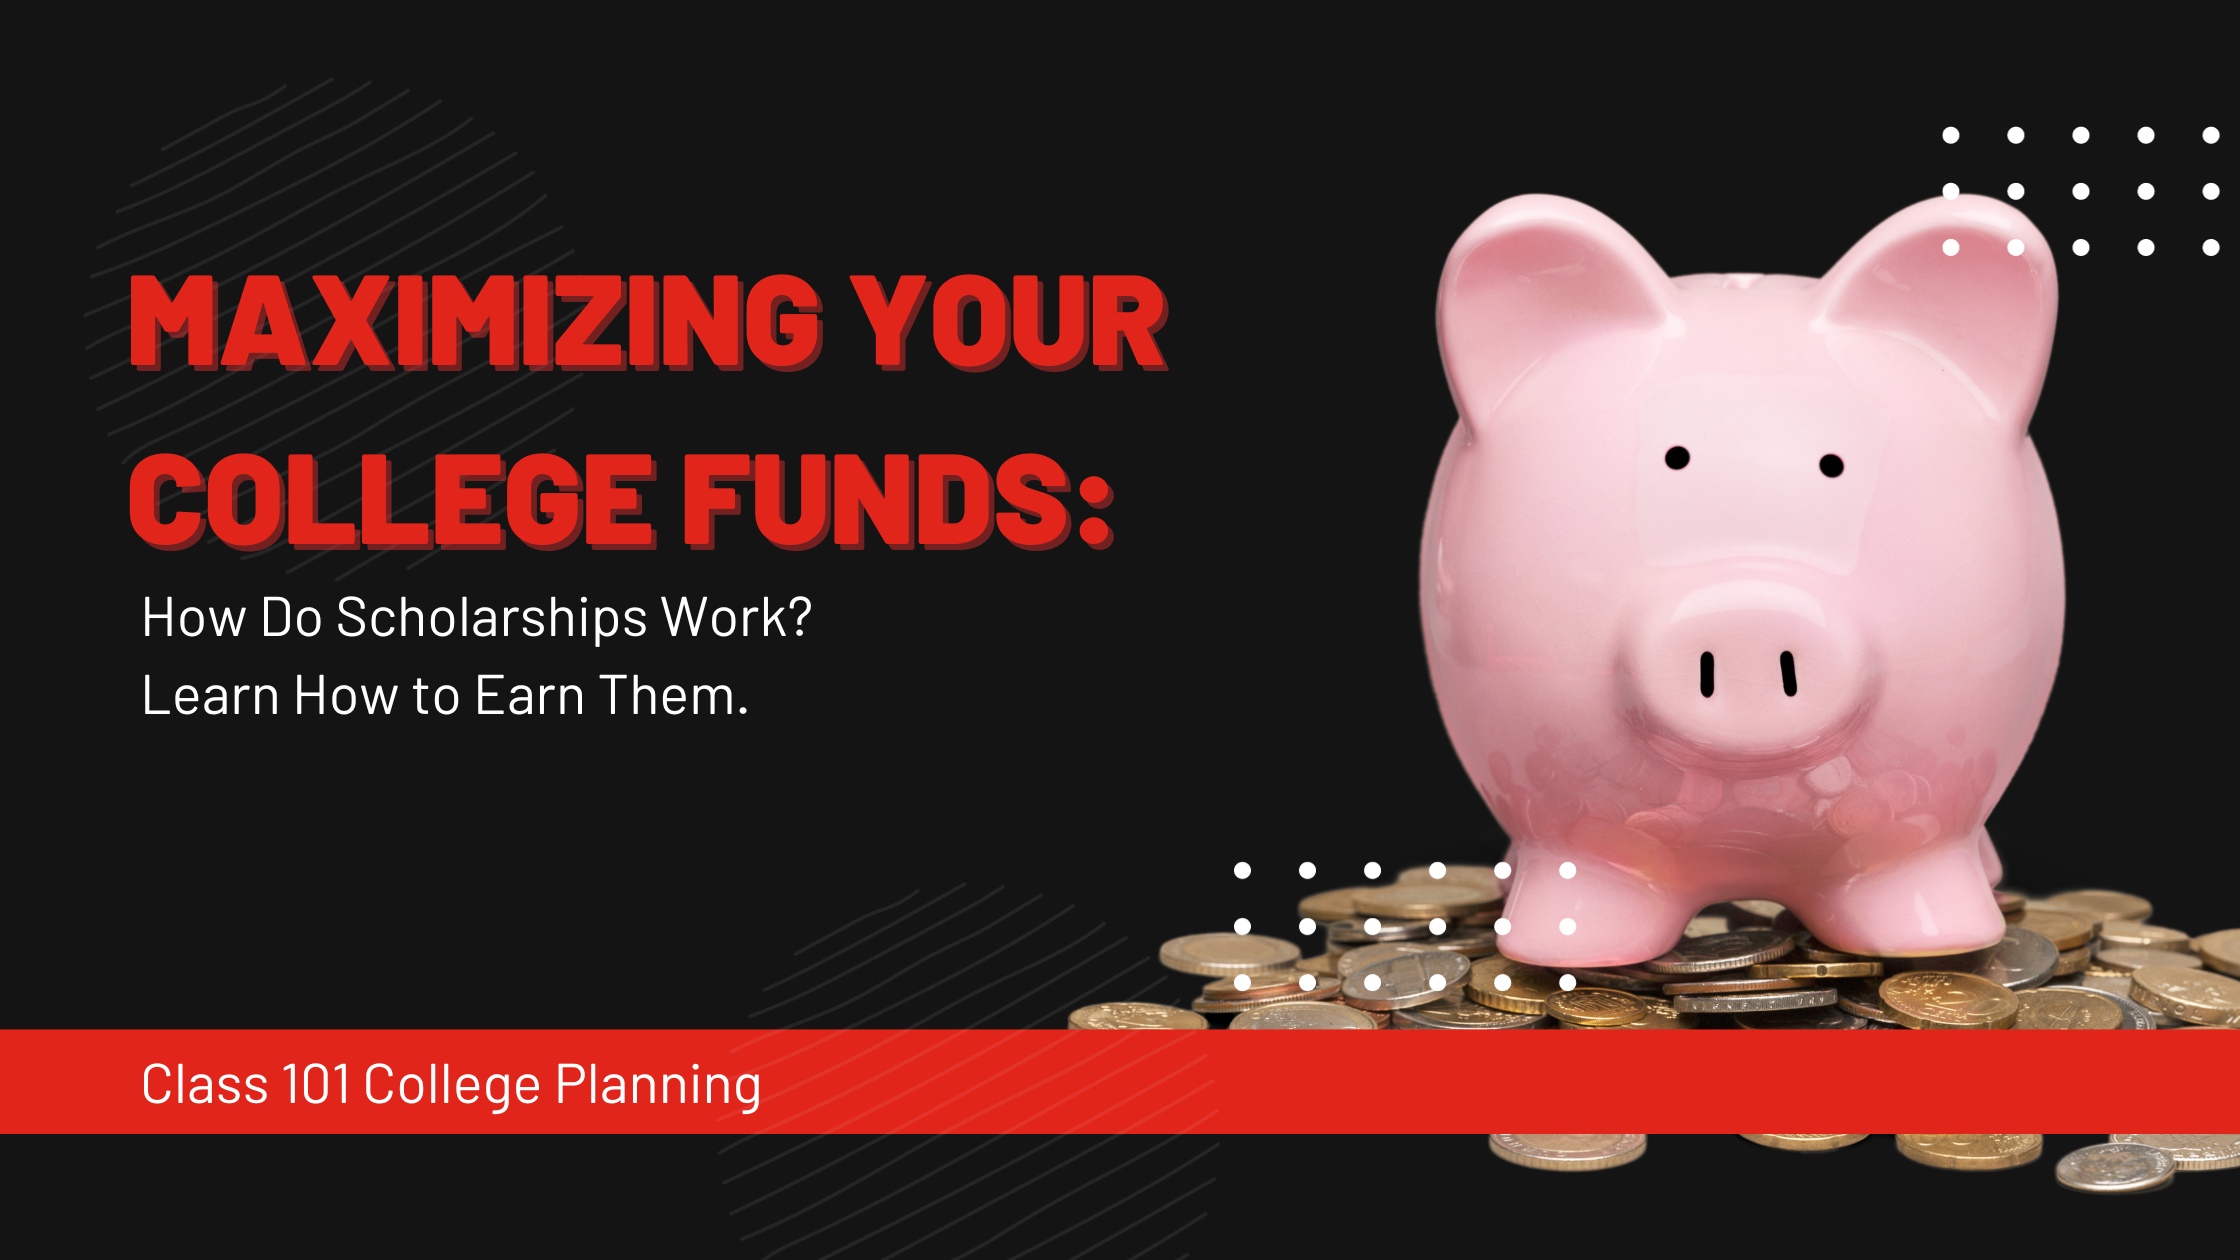 How Do Scholarships Work? Learn How to Earn Them.